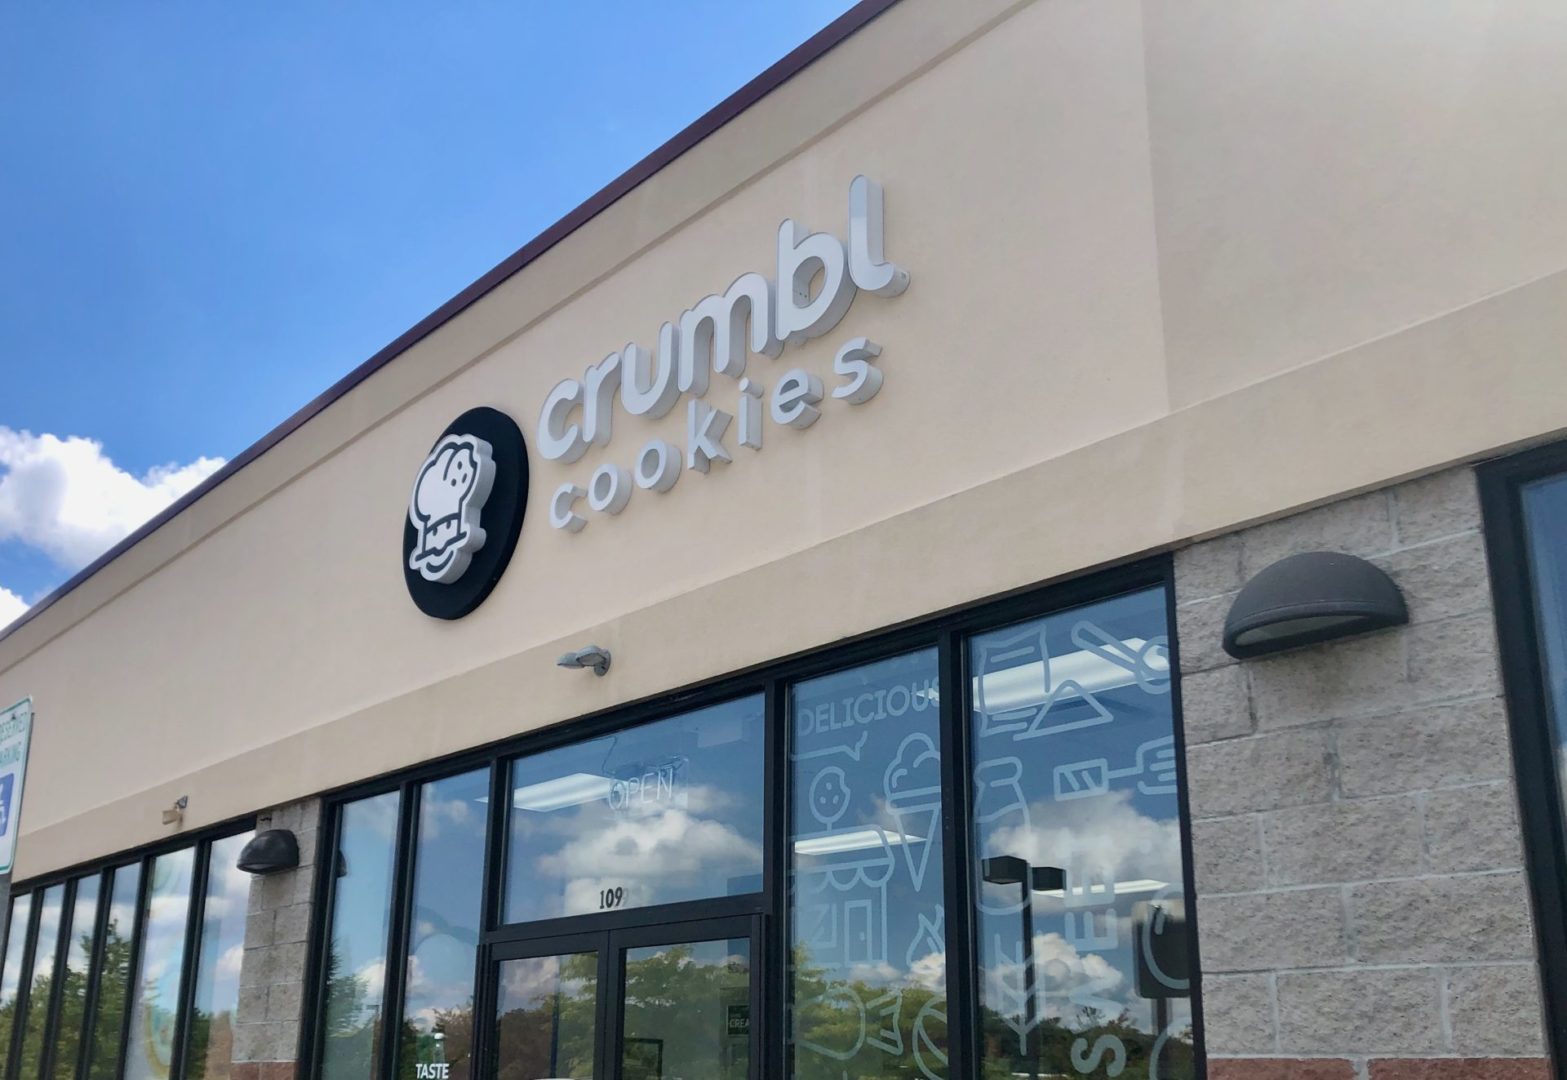 Crumbl Cookies Sets Opening Date for State College Area Store State